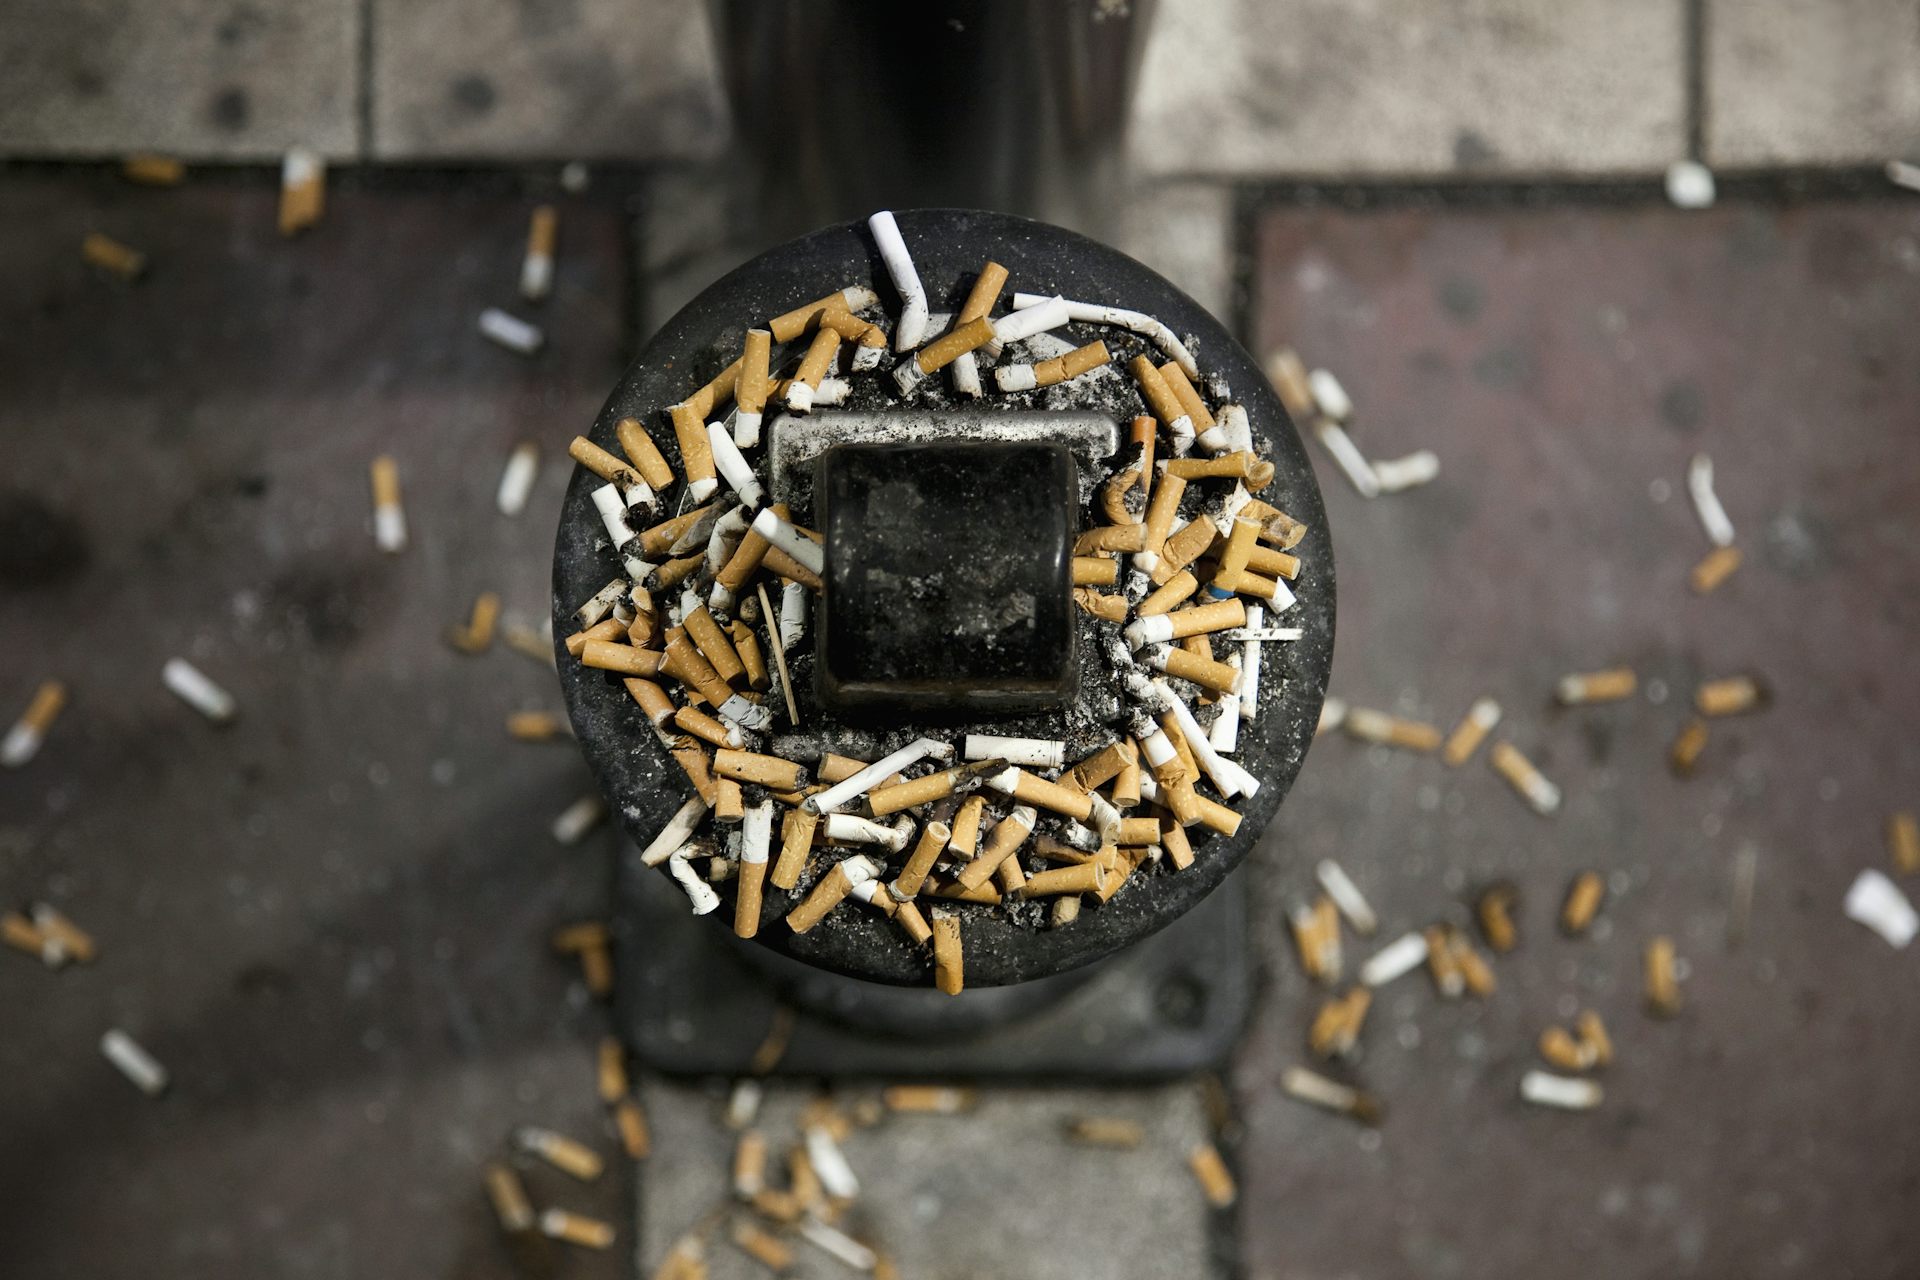 The U.S. Government’s Call for Deep Nicotine Reduction in Cigarettes Could Save Millions of Lives – an Expert Who Studies Tobacco Addiction Explains